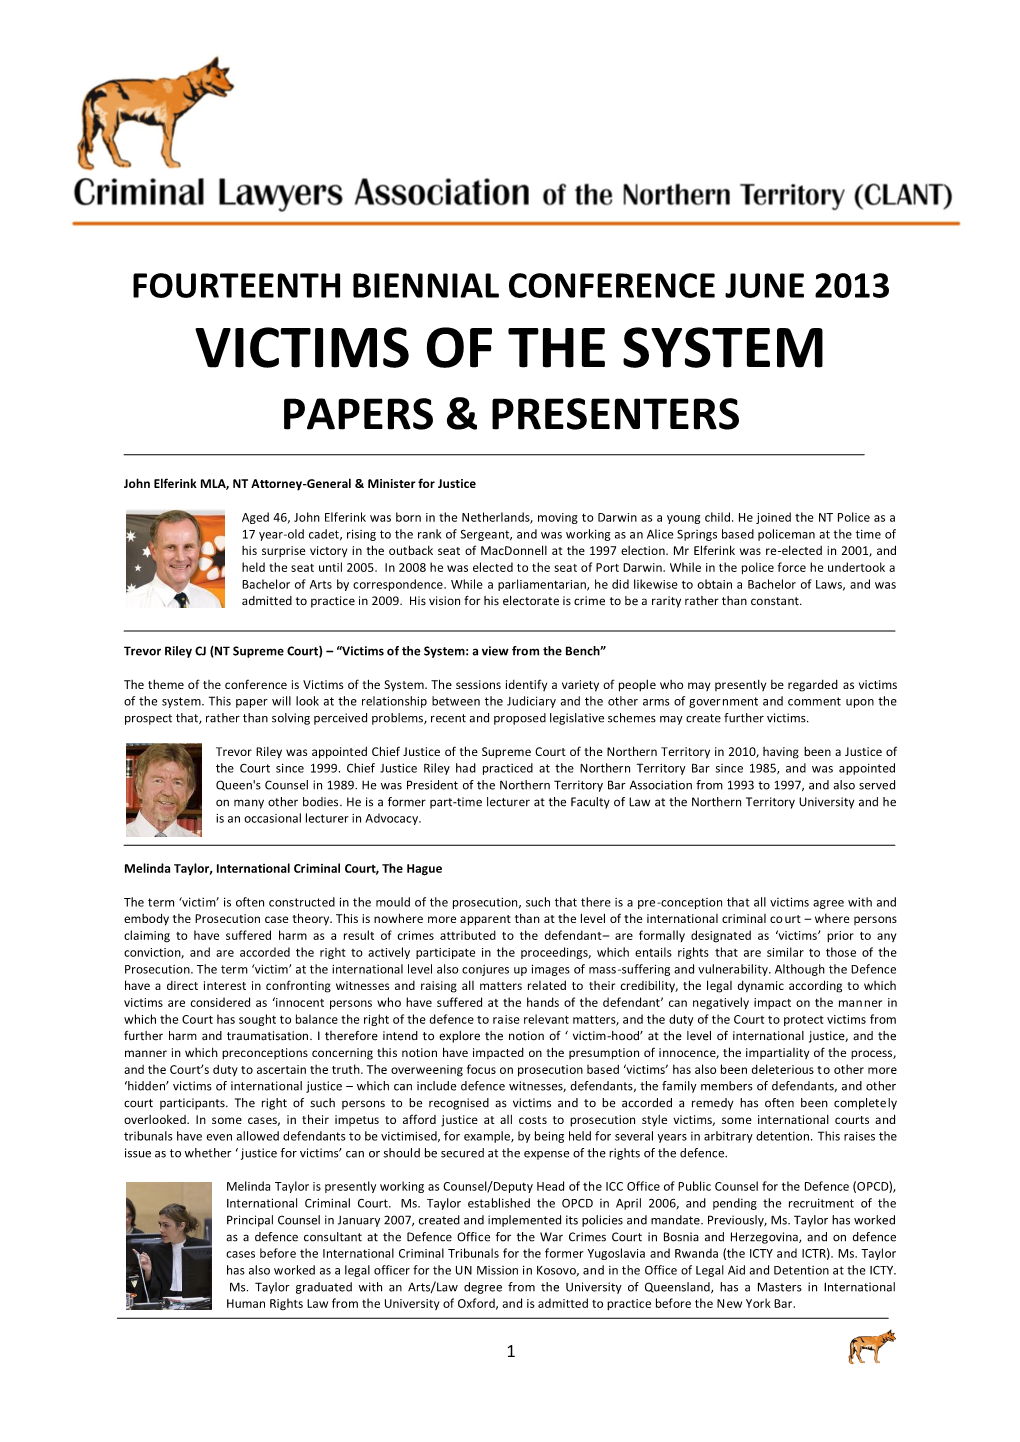 Victims of the System Papers & Presenters